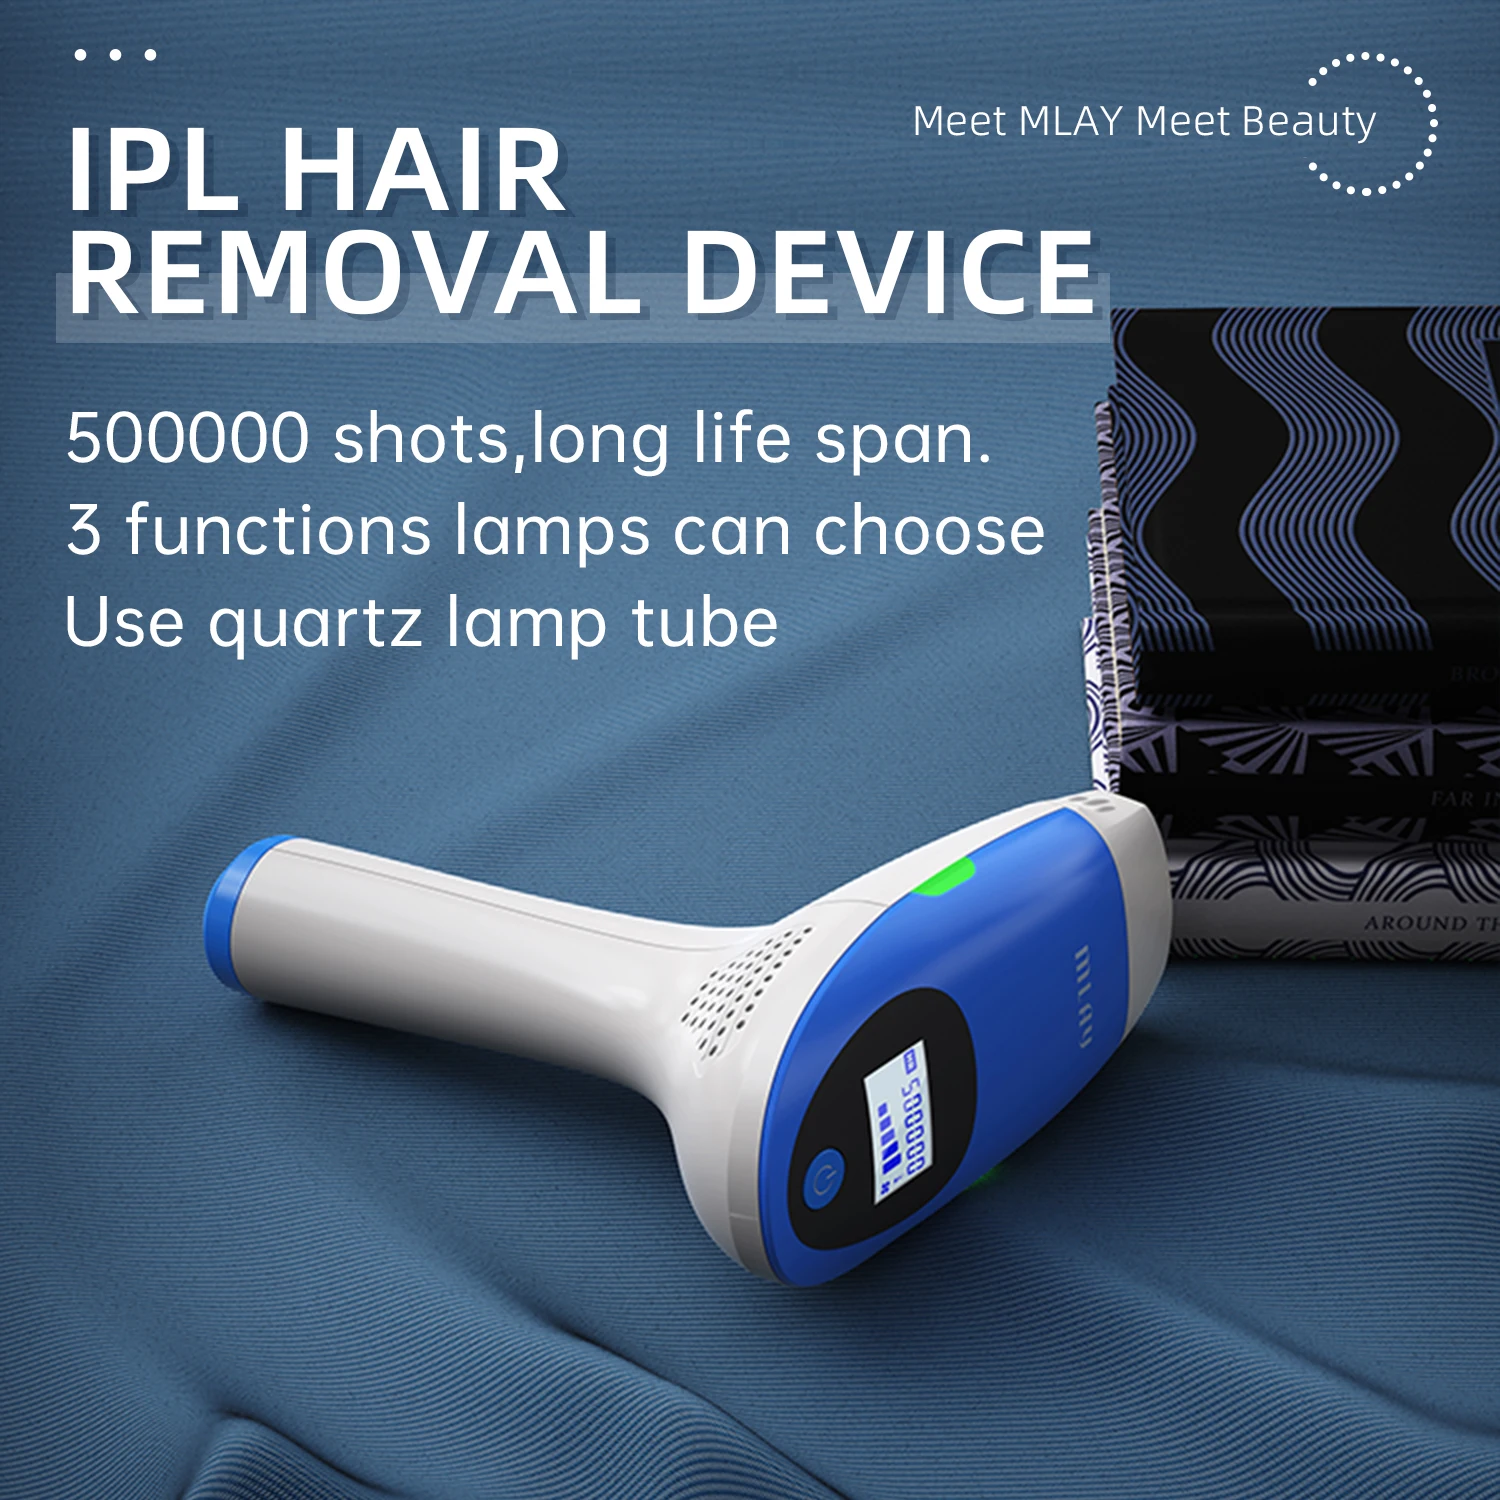 Mlay T3 Mini Portable IPL Laser Hair Removal Device Three Wave for Home Use Skin Rejuvenation with US Plug Free Shipment